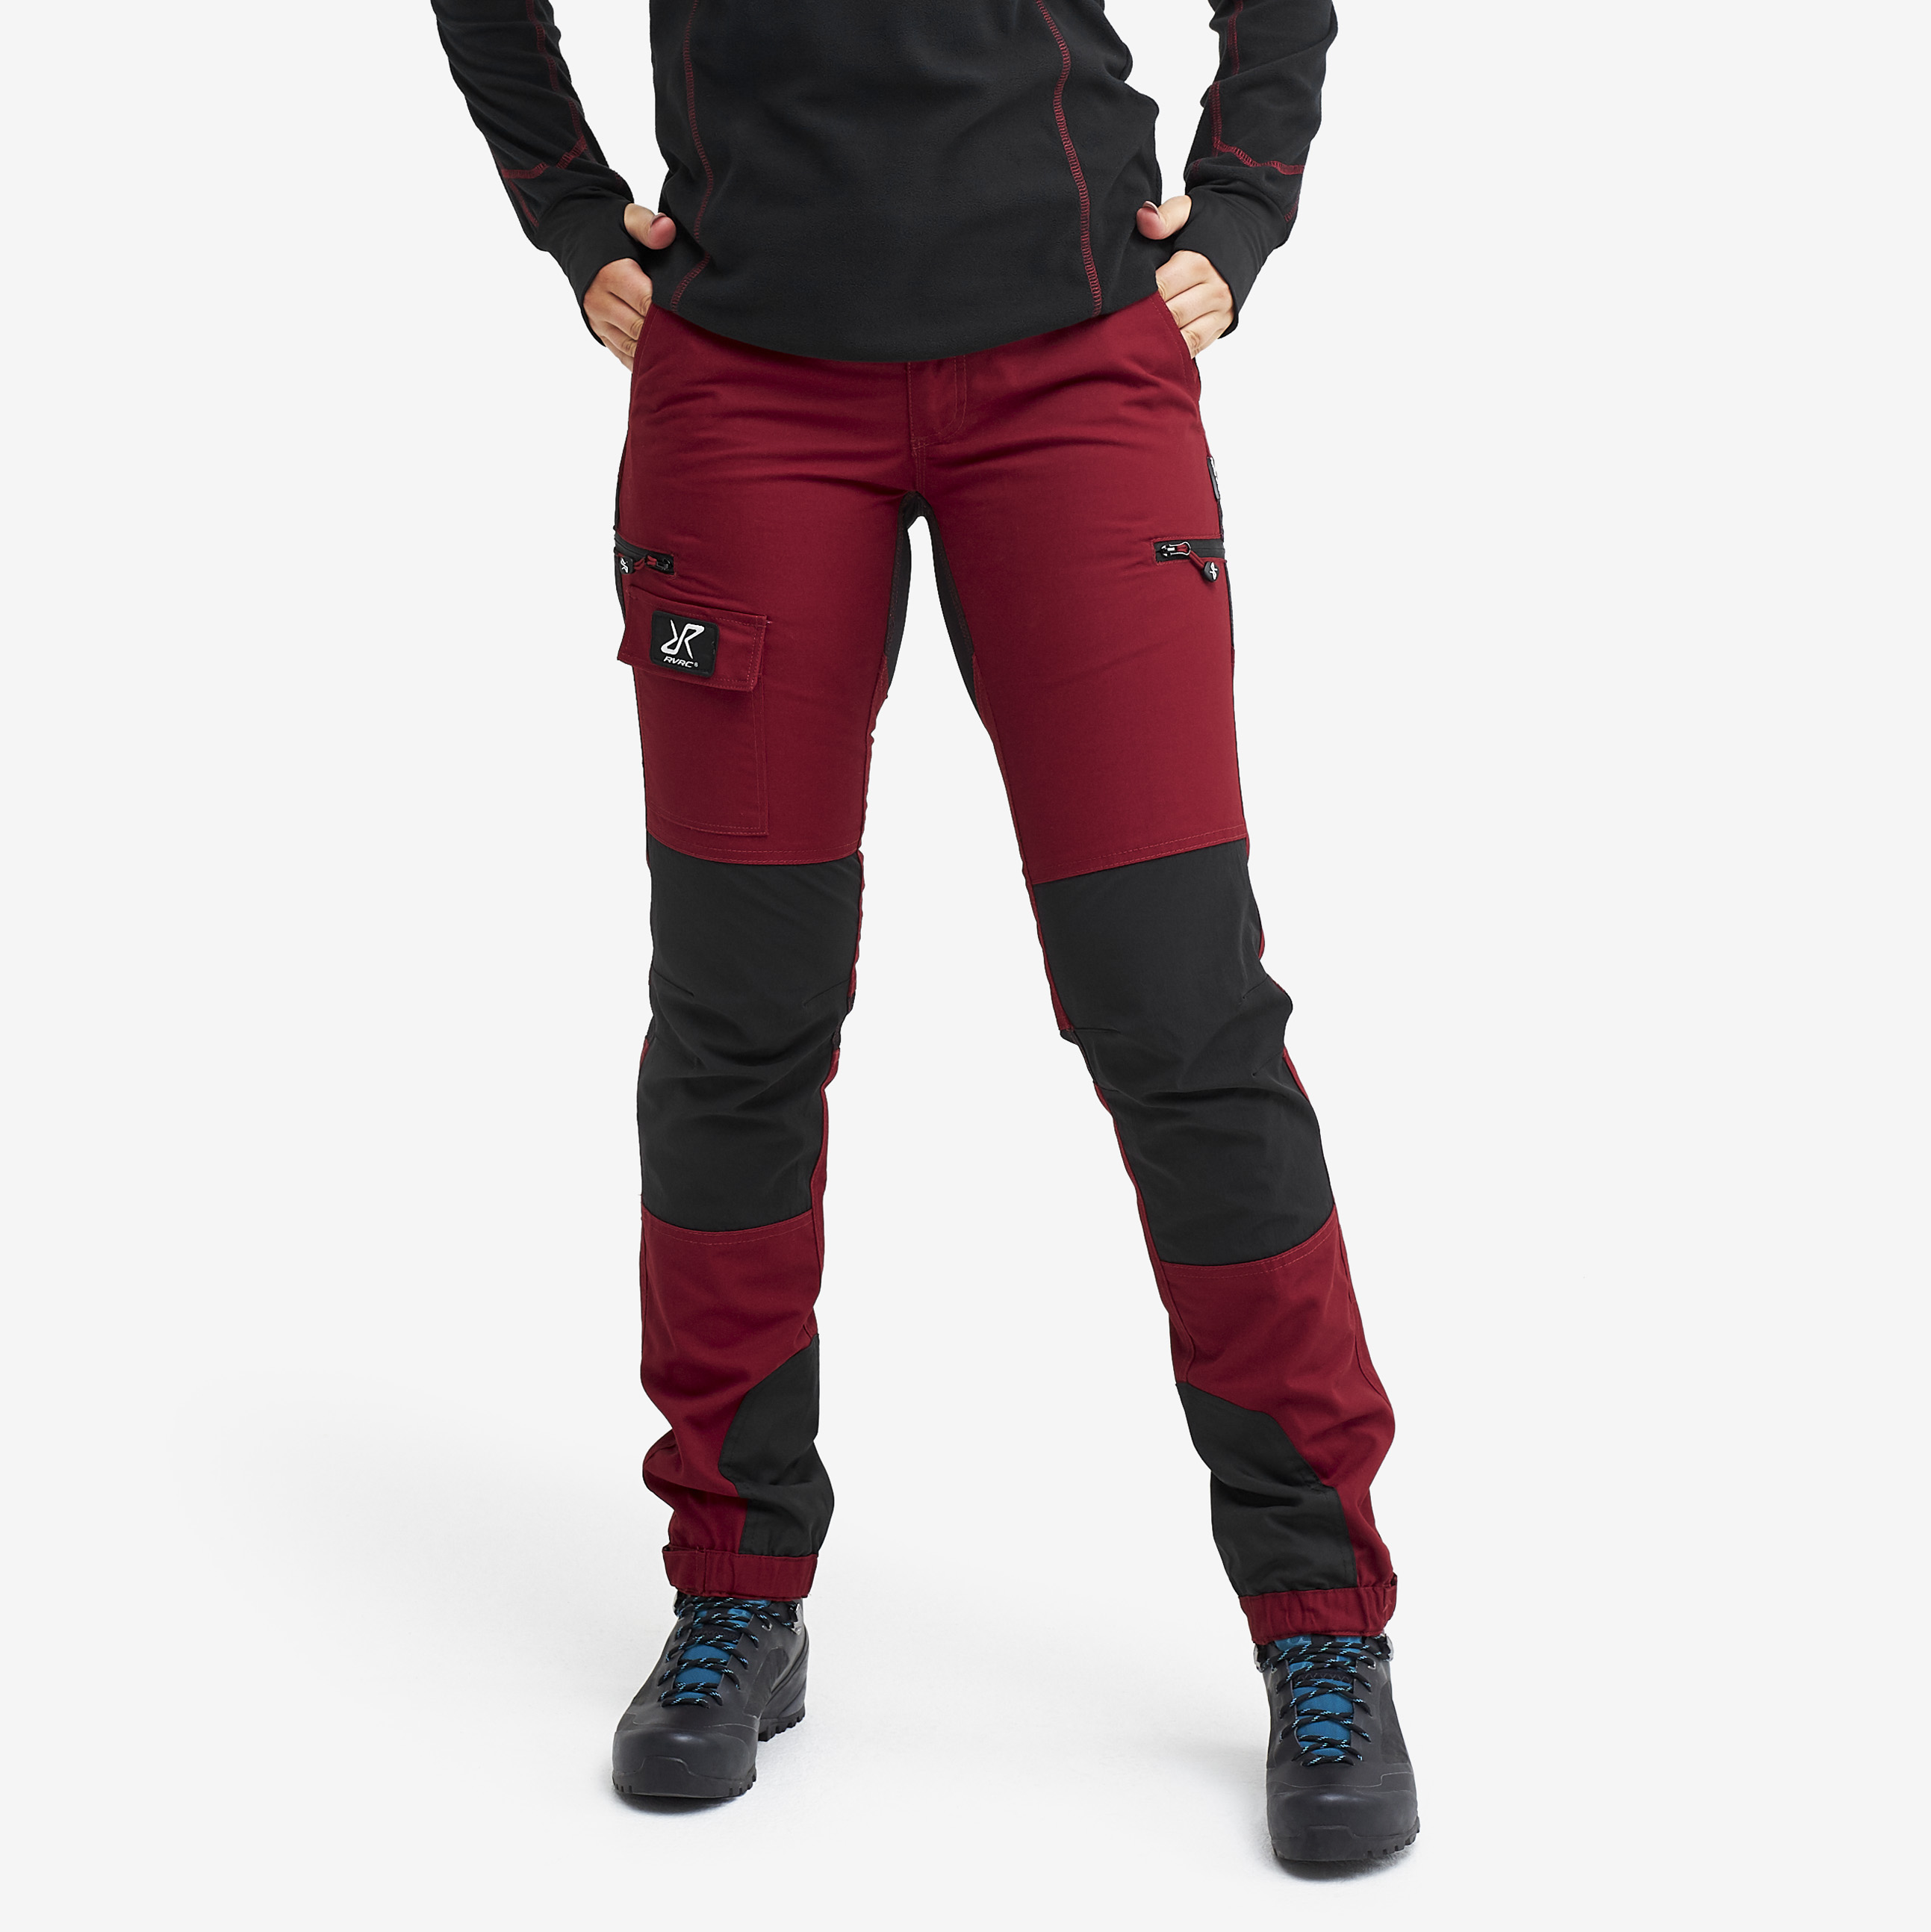 Nordwand walking trousers for women in red